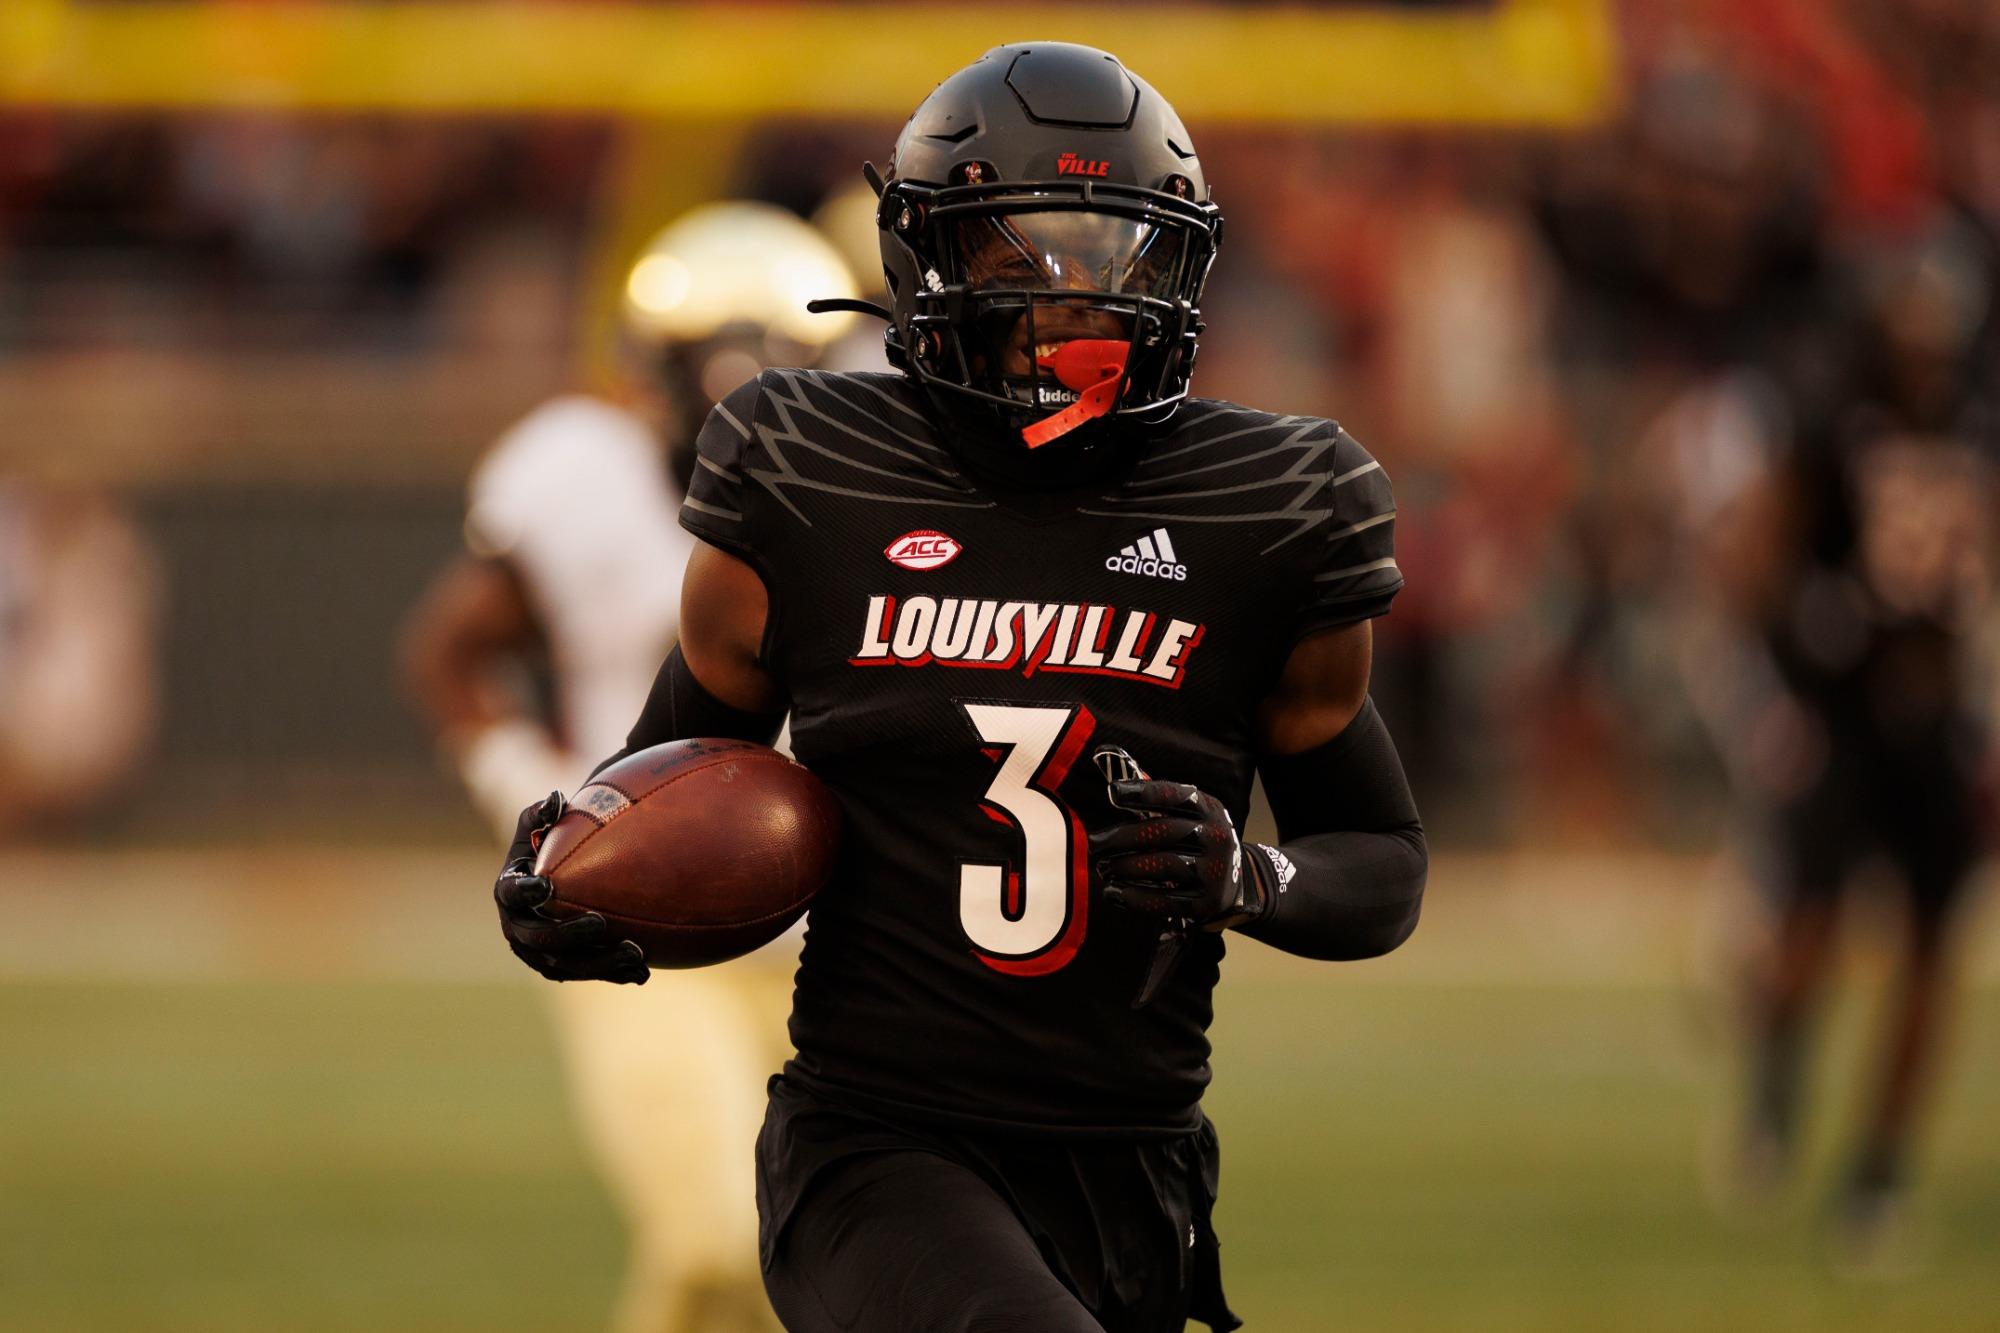 Quincy Riley is a savvy CB at Louisville who displays good instincts and great speed. Hula Bowl scout Brinson Bagley breaks down Riley as an NFL Prospect in his report.